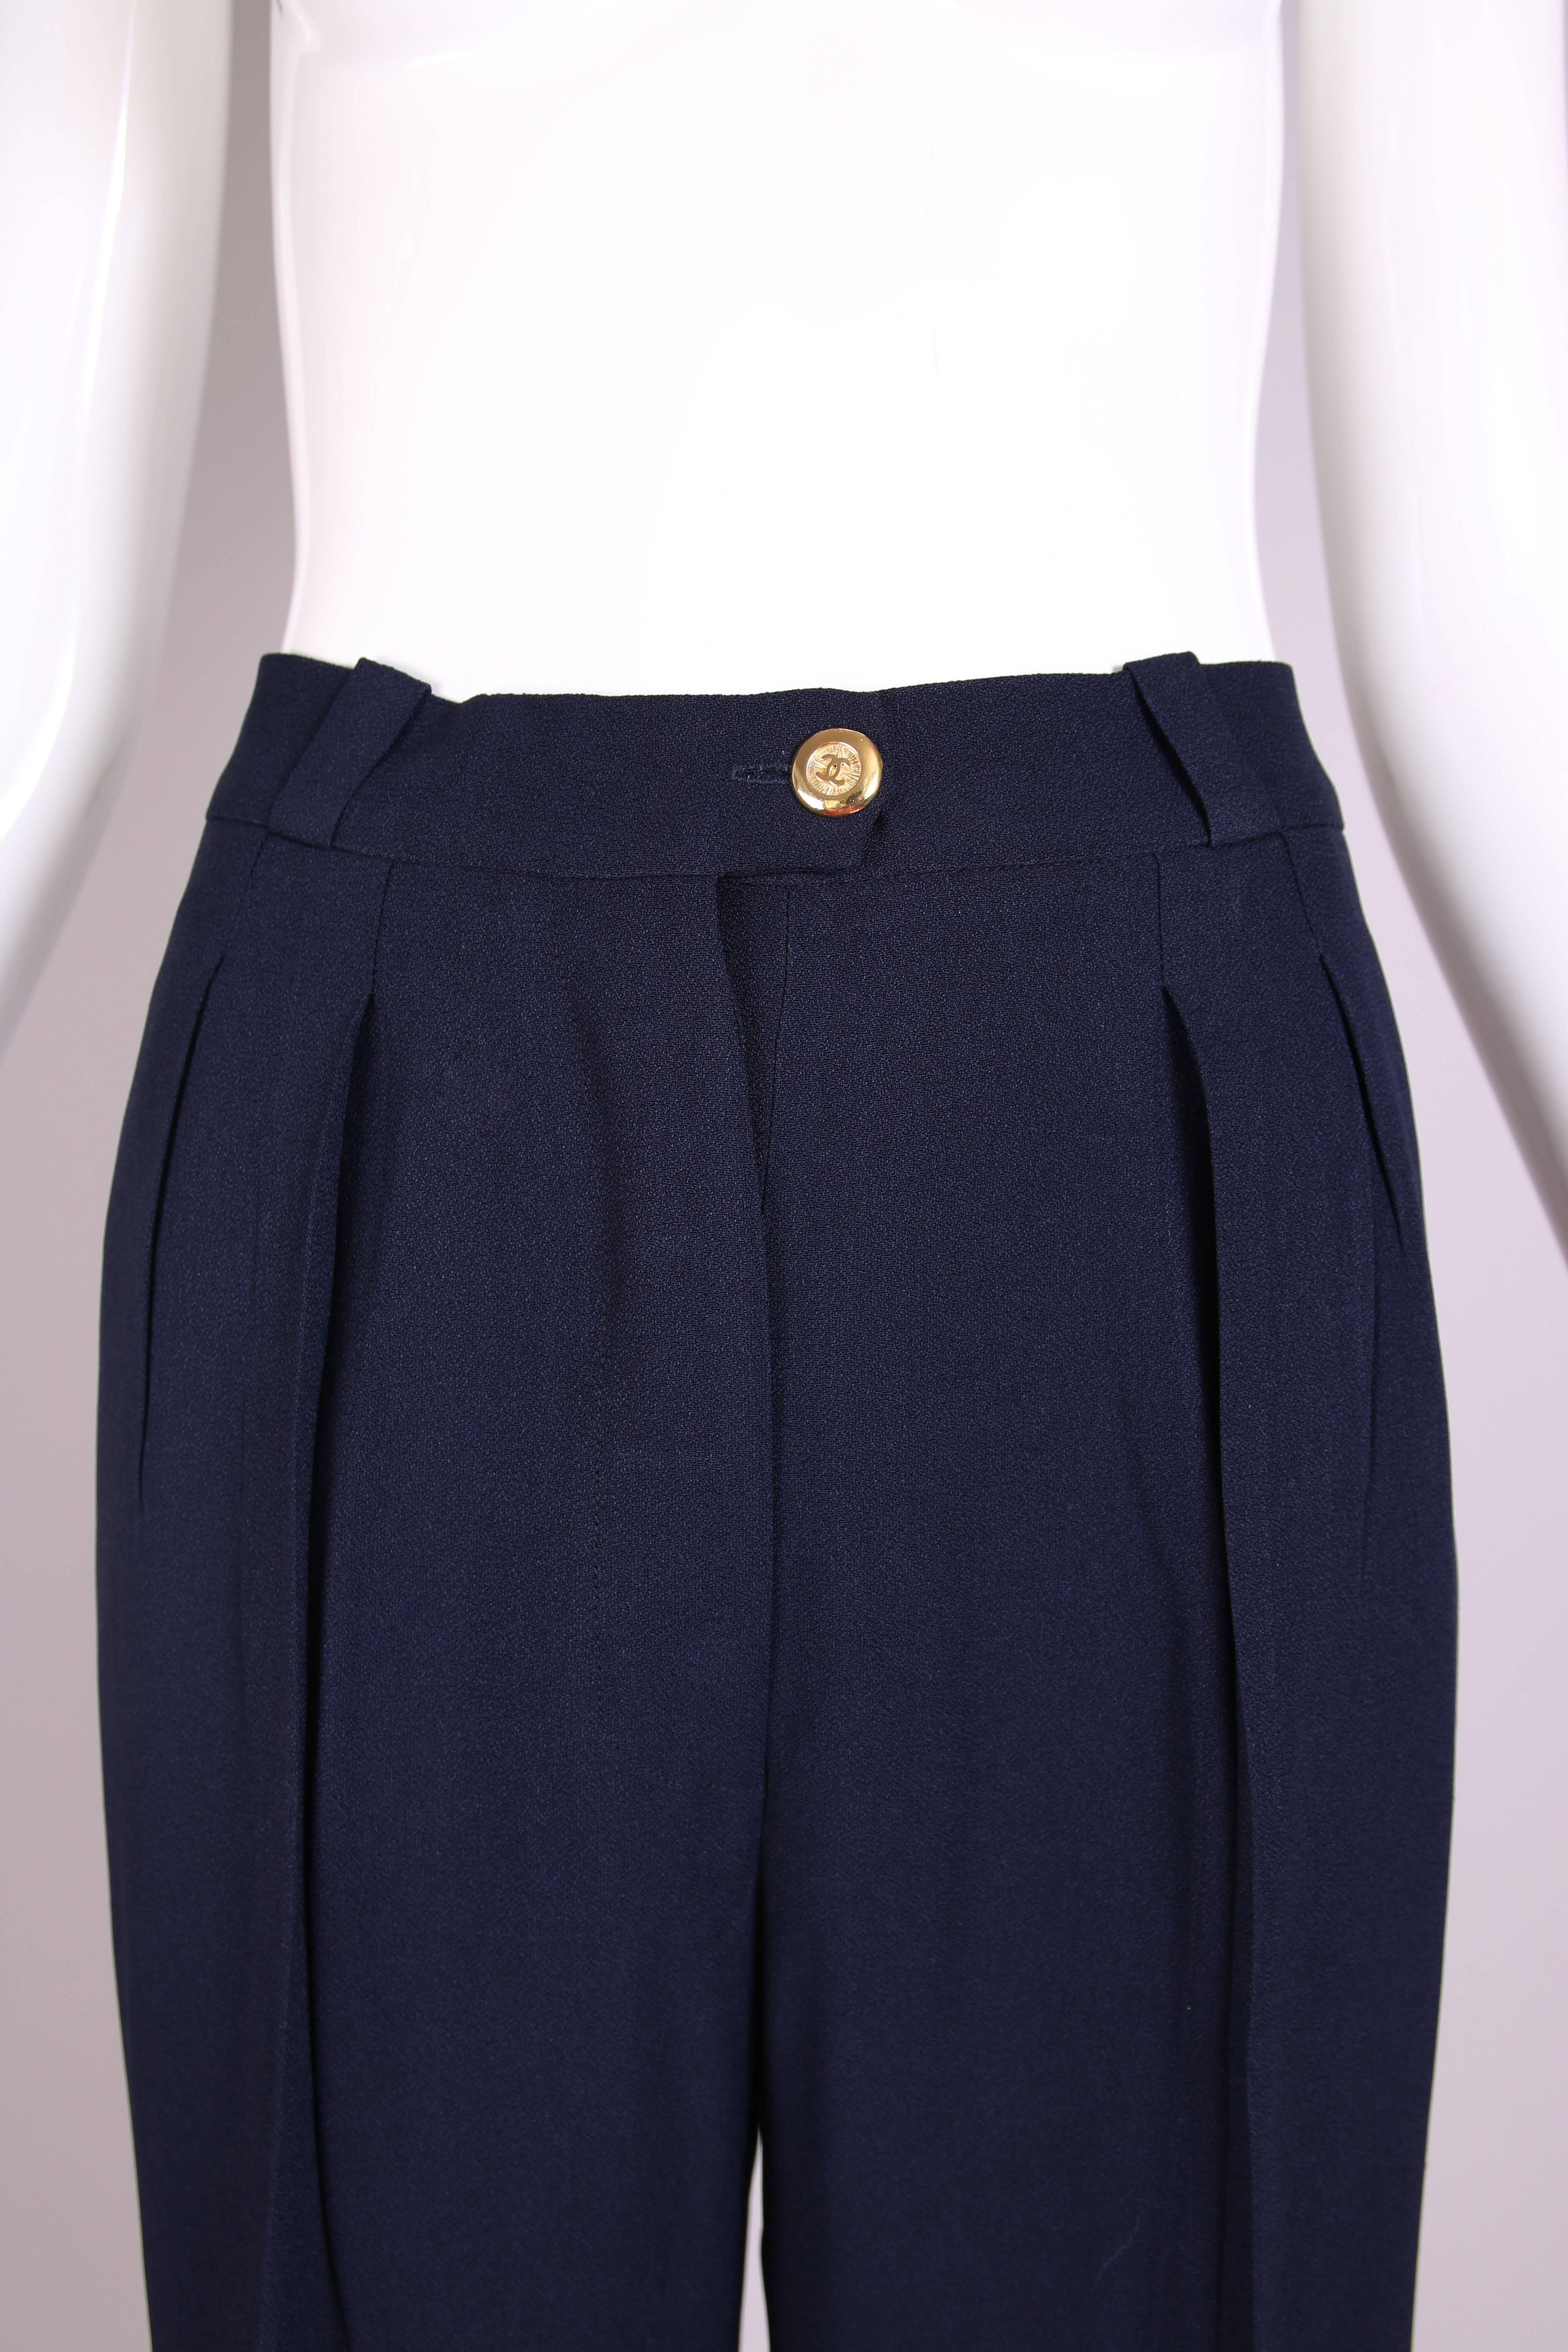 Chanel Navy Crepe High-Waist Trousers  1